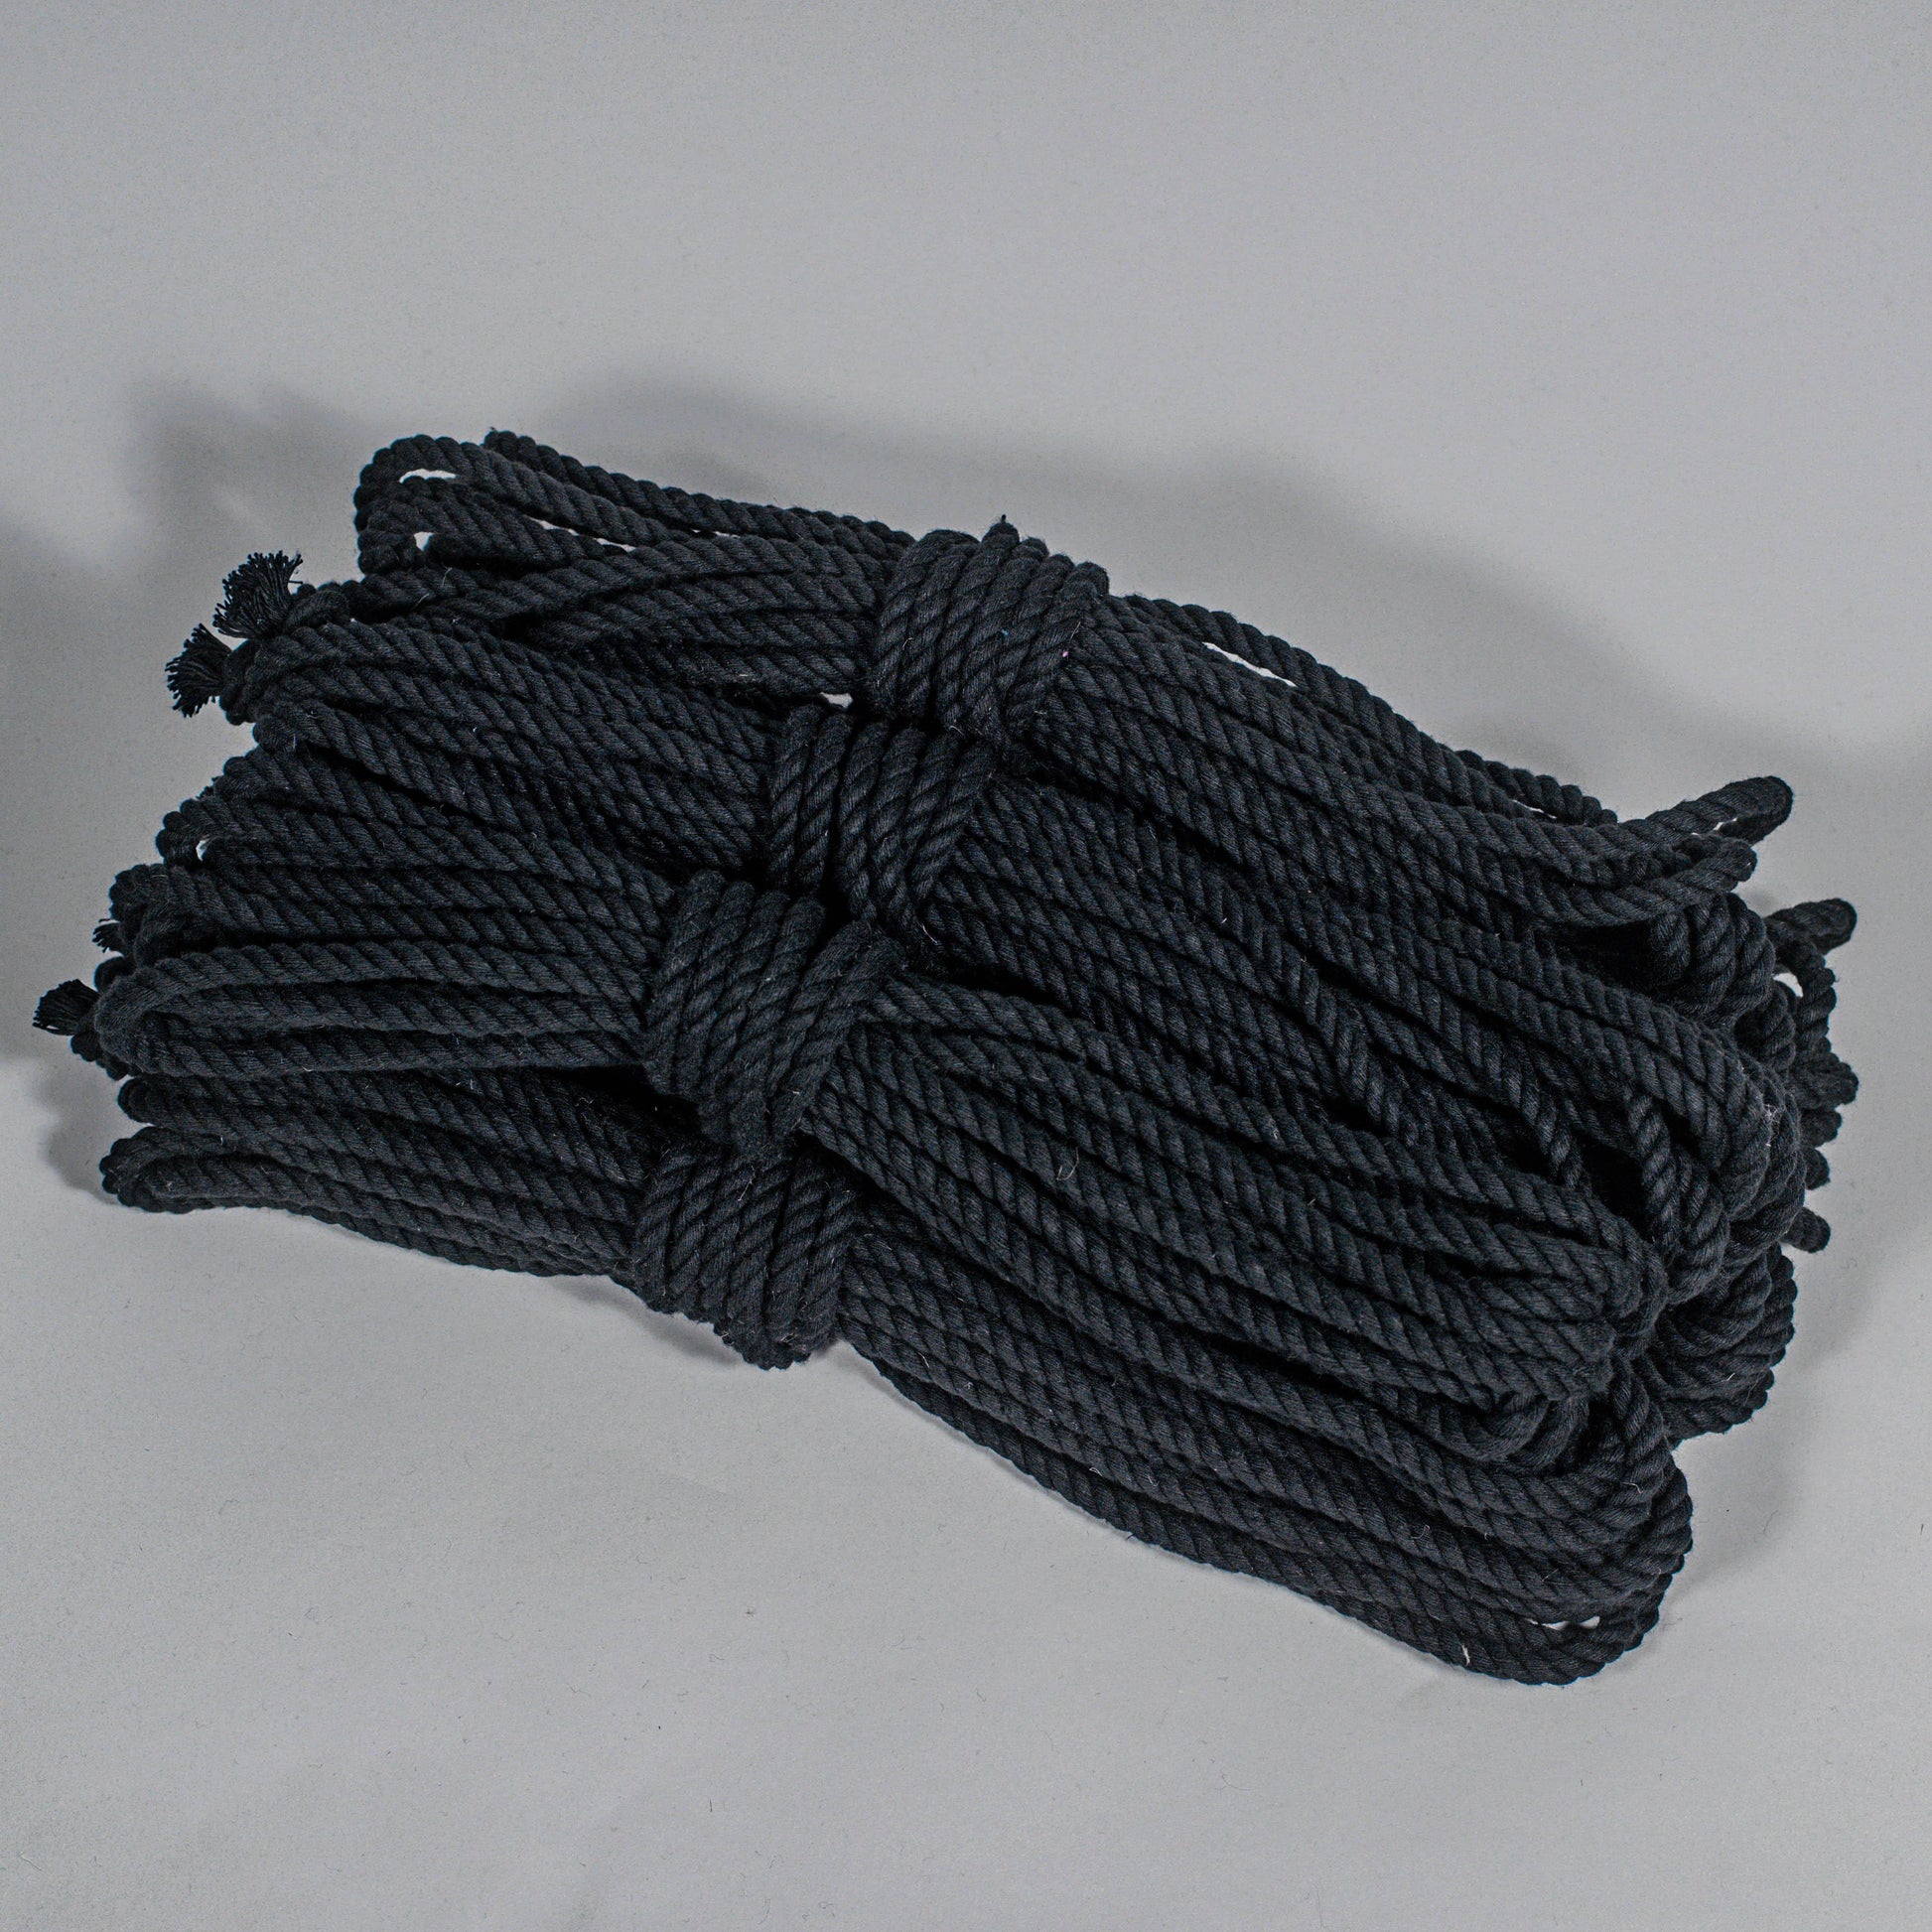 Cotton Play Ropes – Anatomie Rope Shop